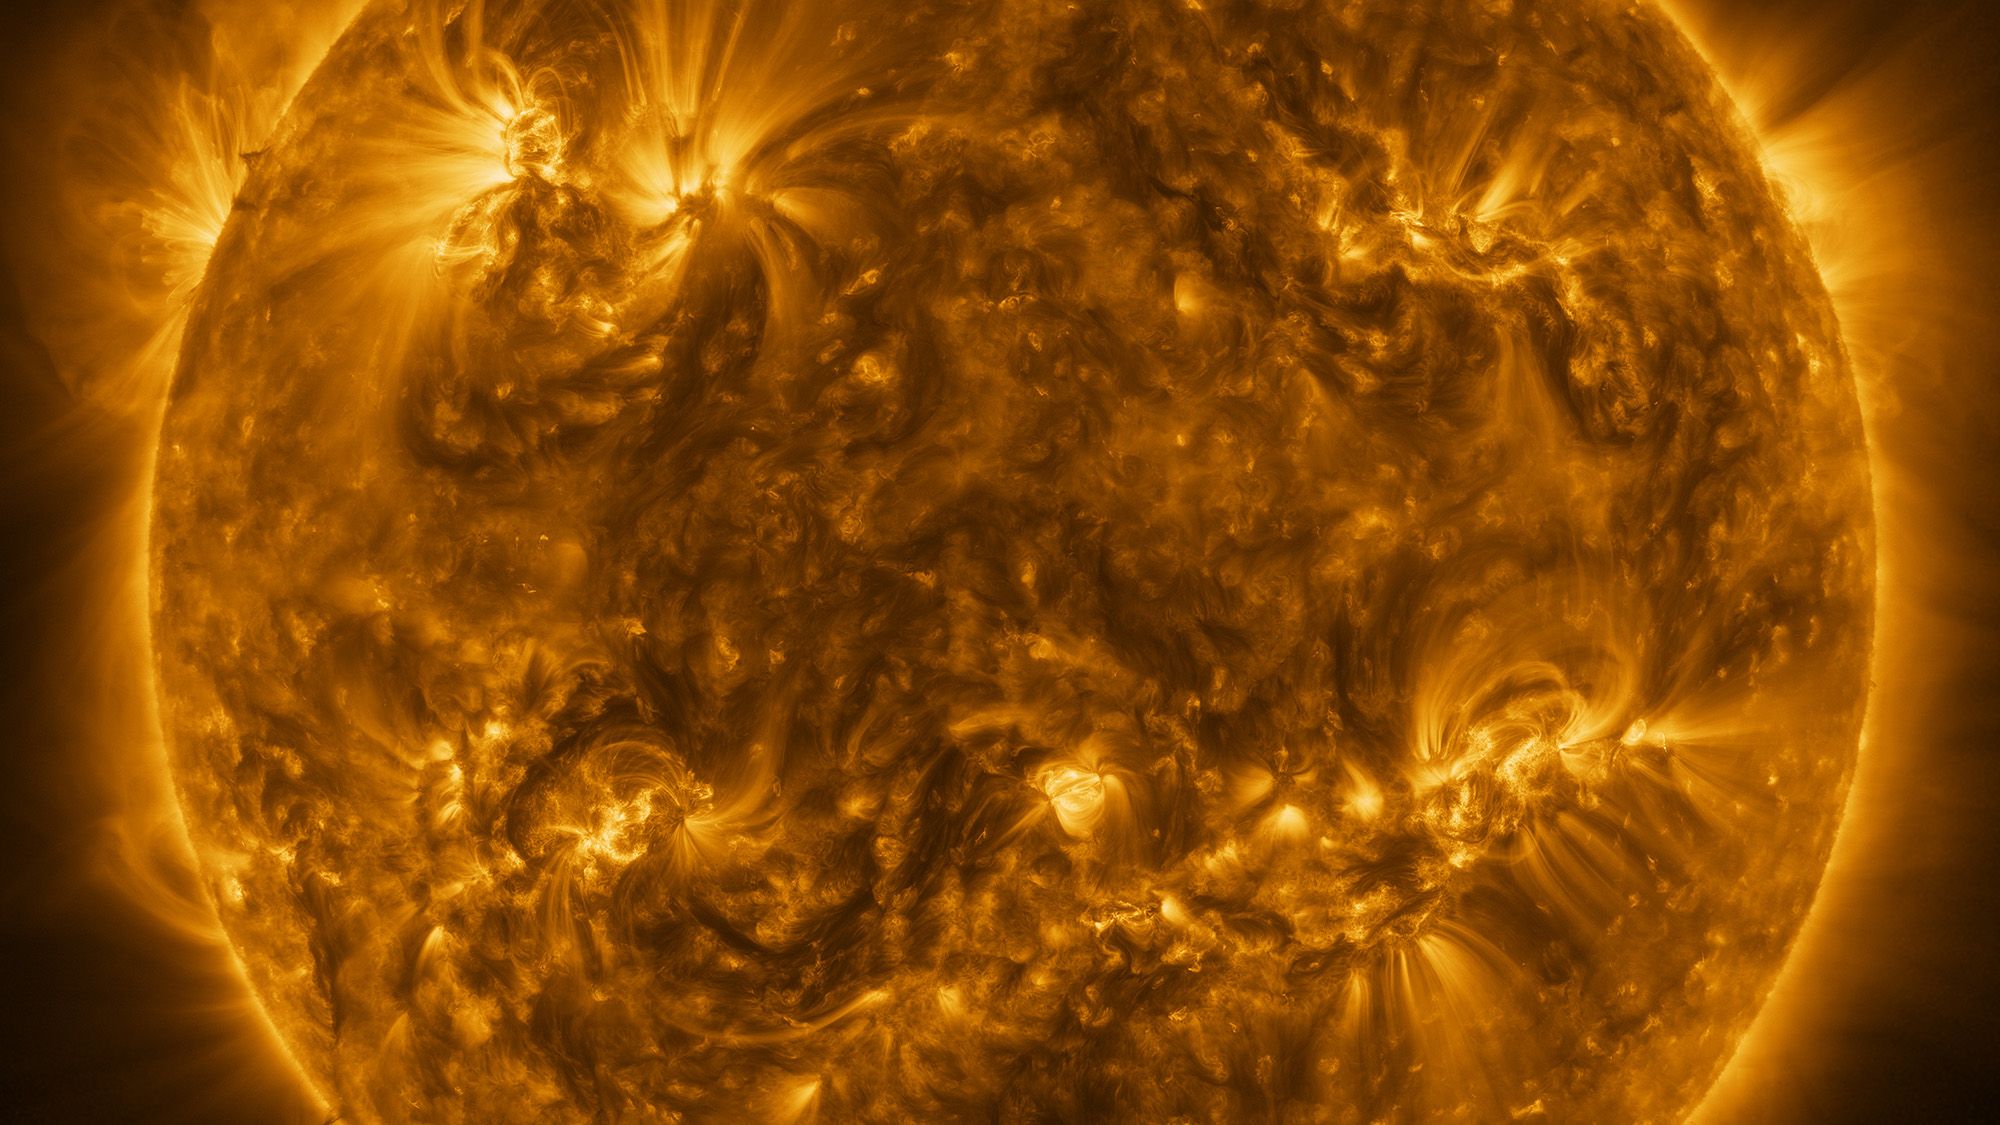 See The Jaw-Dropping New 83 Megapixel Photo Of The Sun